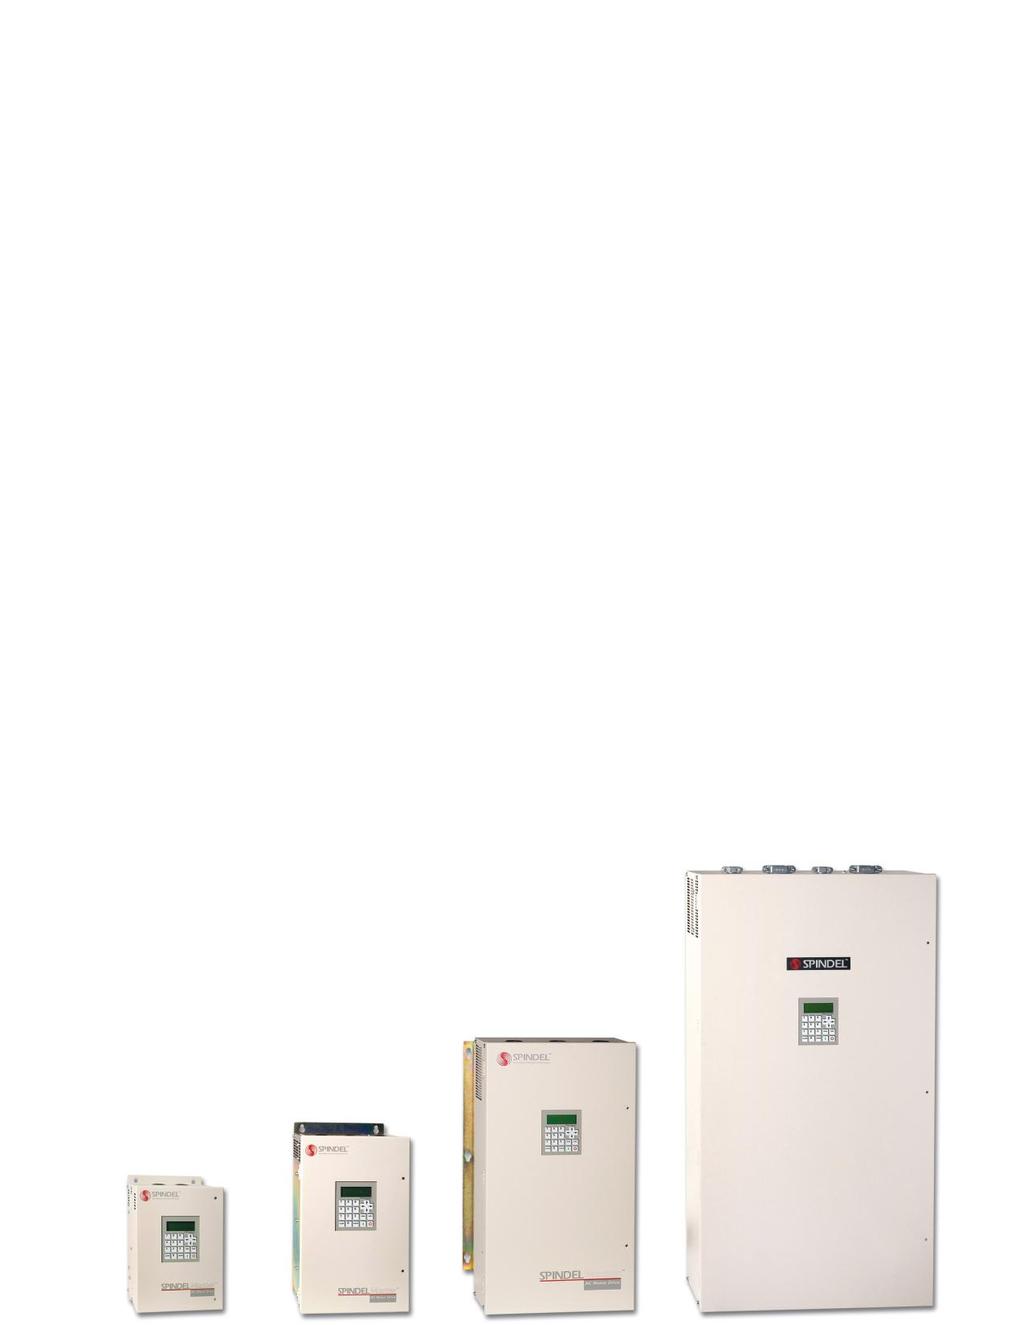 Nominal AC Line Voltage: 80, 415, 460 V AC, 50/60 Hz 80-460 V AC Rating No. Continuous Output Current 150% Output Current KW[HP] at 460V Input Phases Dimensions H x W x D mm [inches] 4V00A-*. 5.0 2 [1.